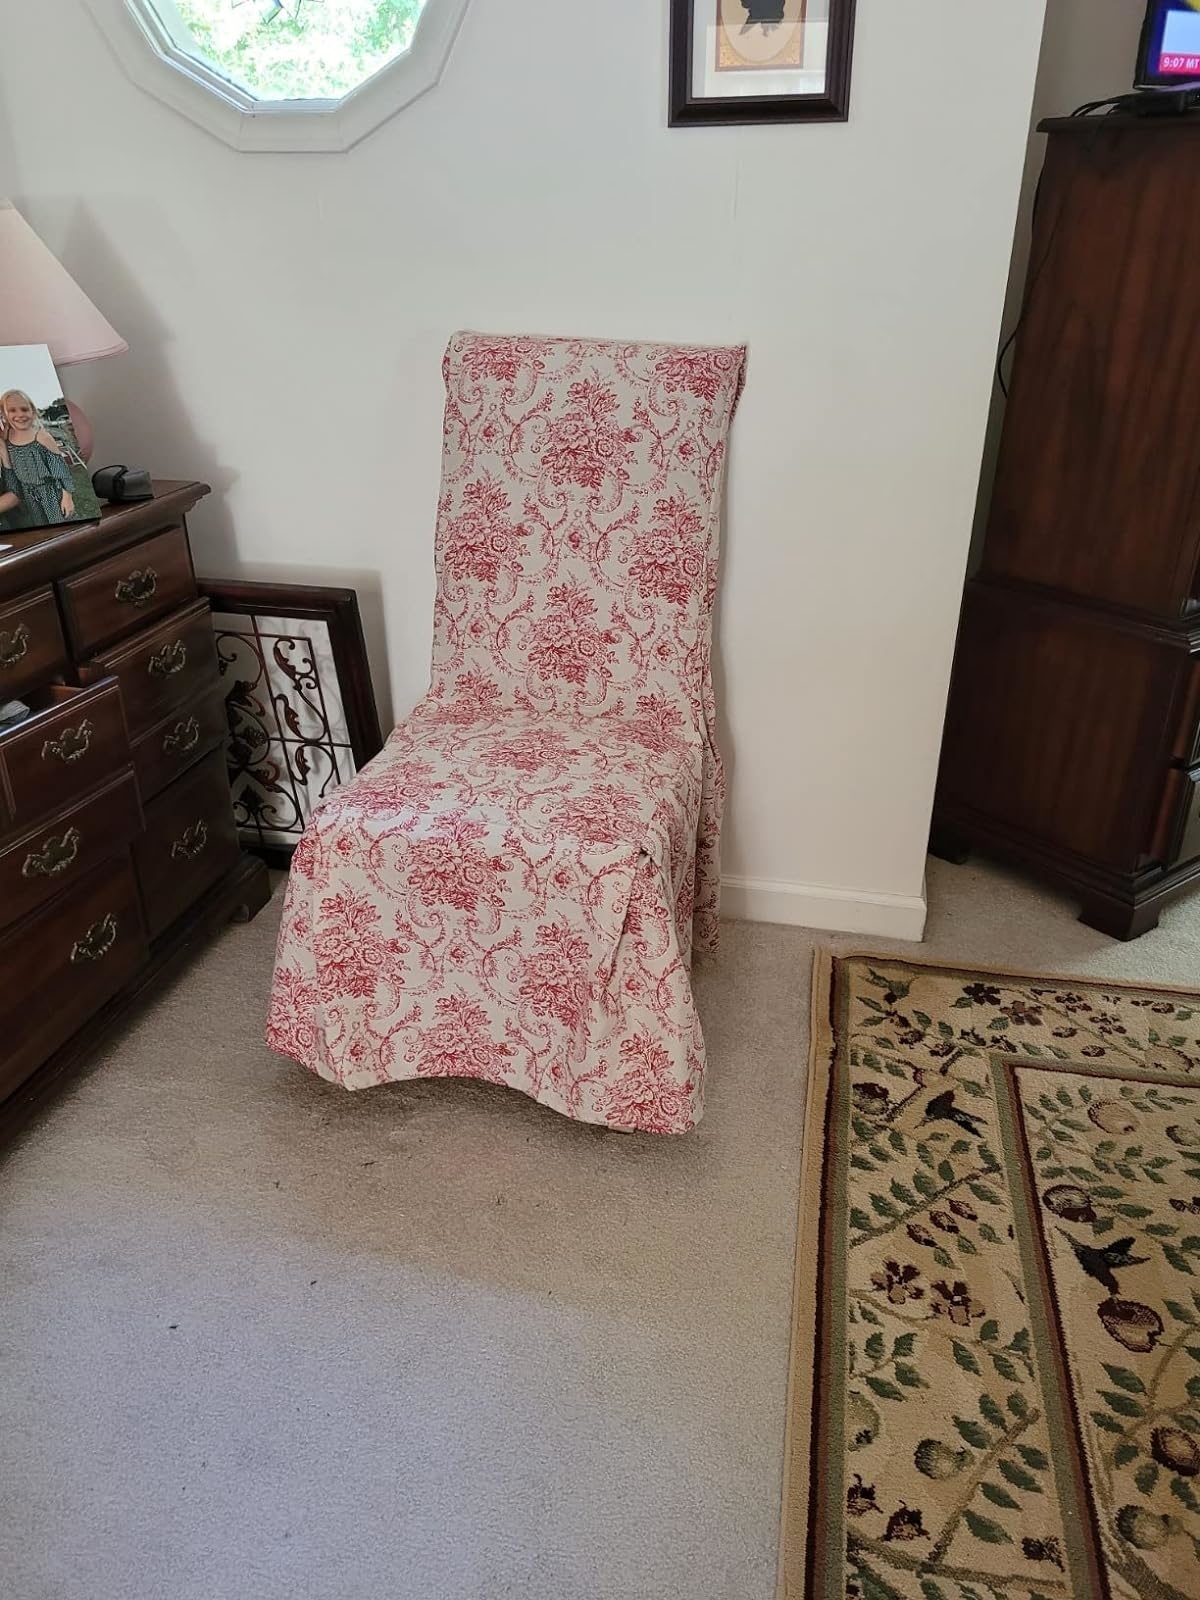 A floral patterned chaise lounge in a home interior setting